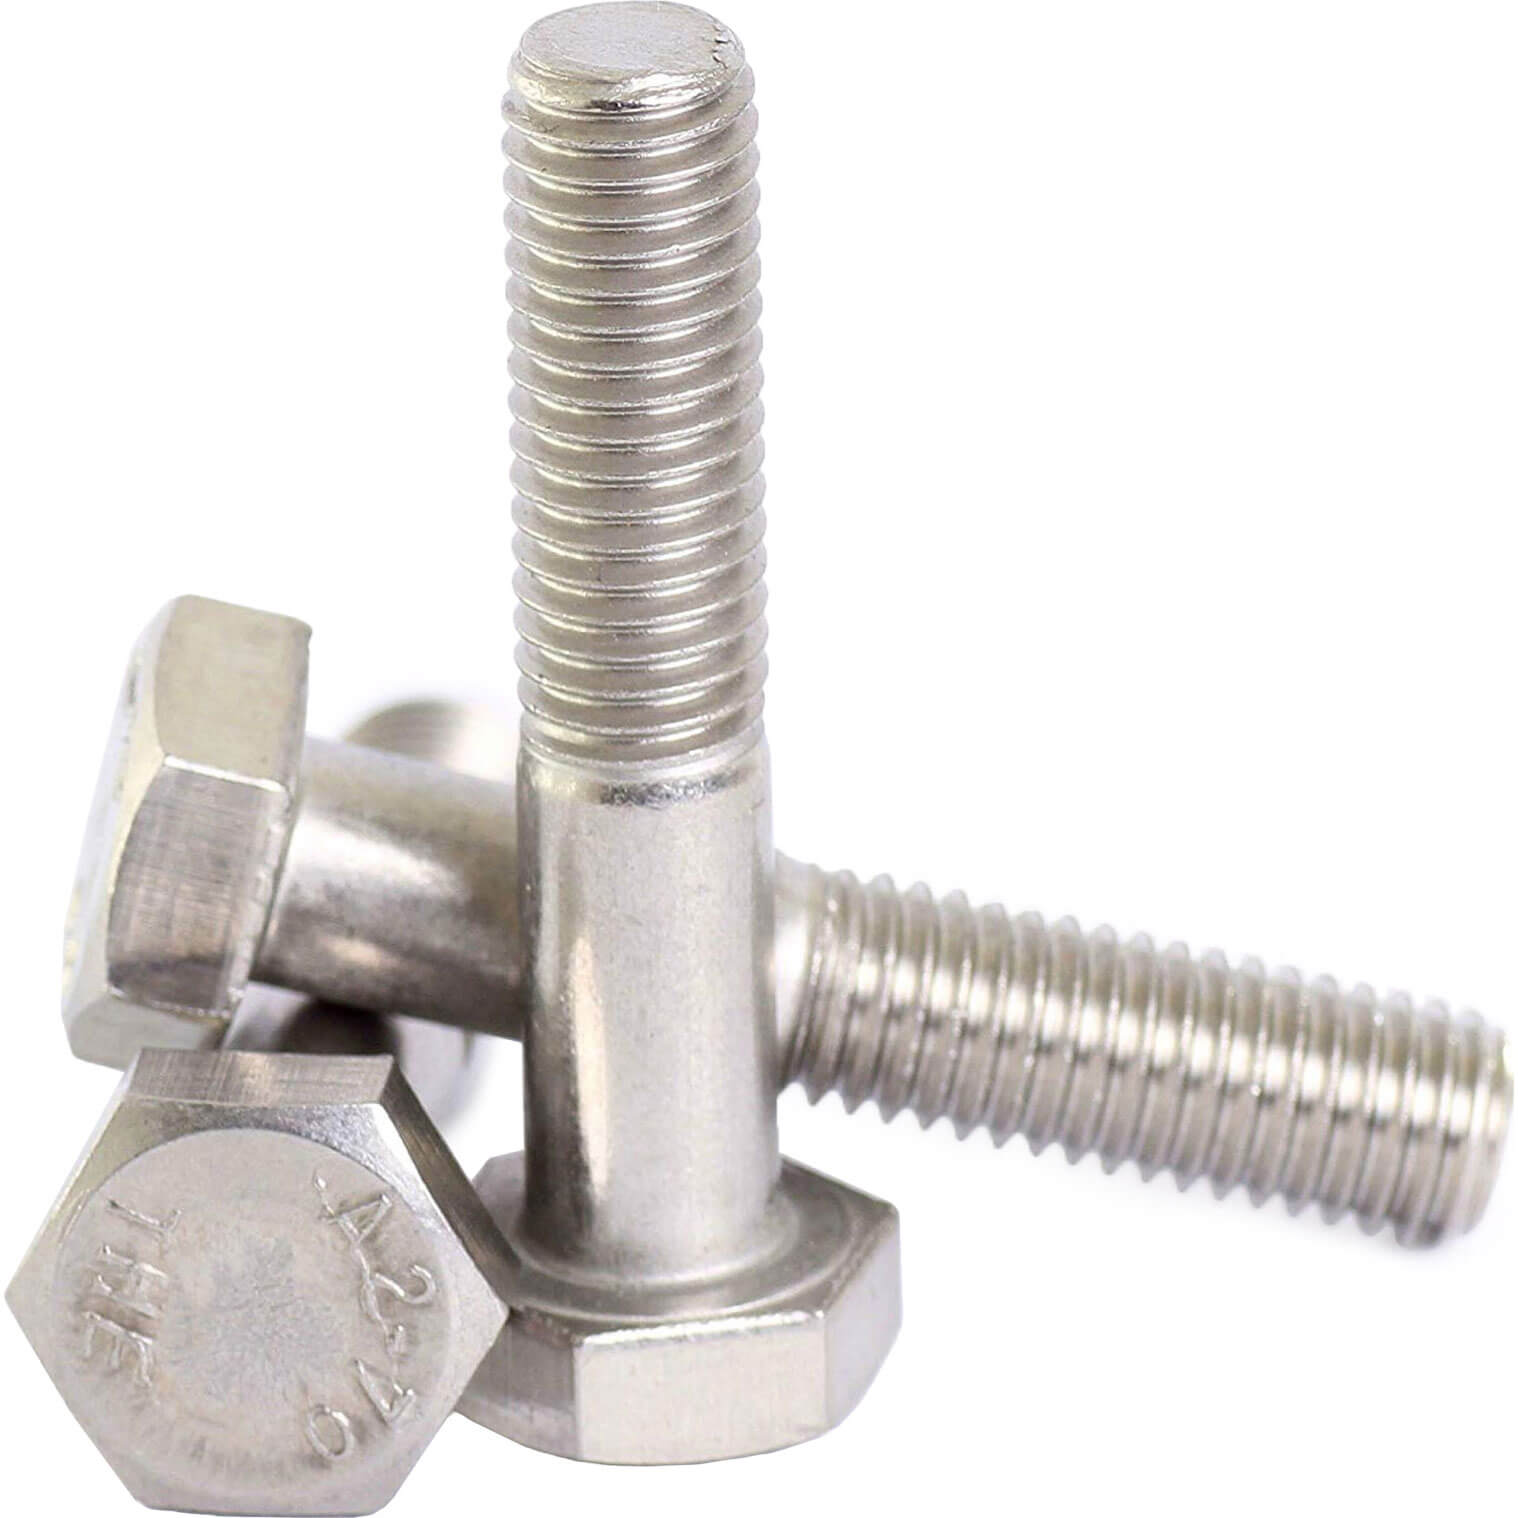 Image of Sirius Bolts A2 304 Stainless Steel M12 110mm Pack of 1